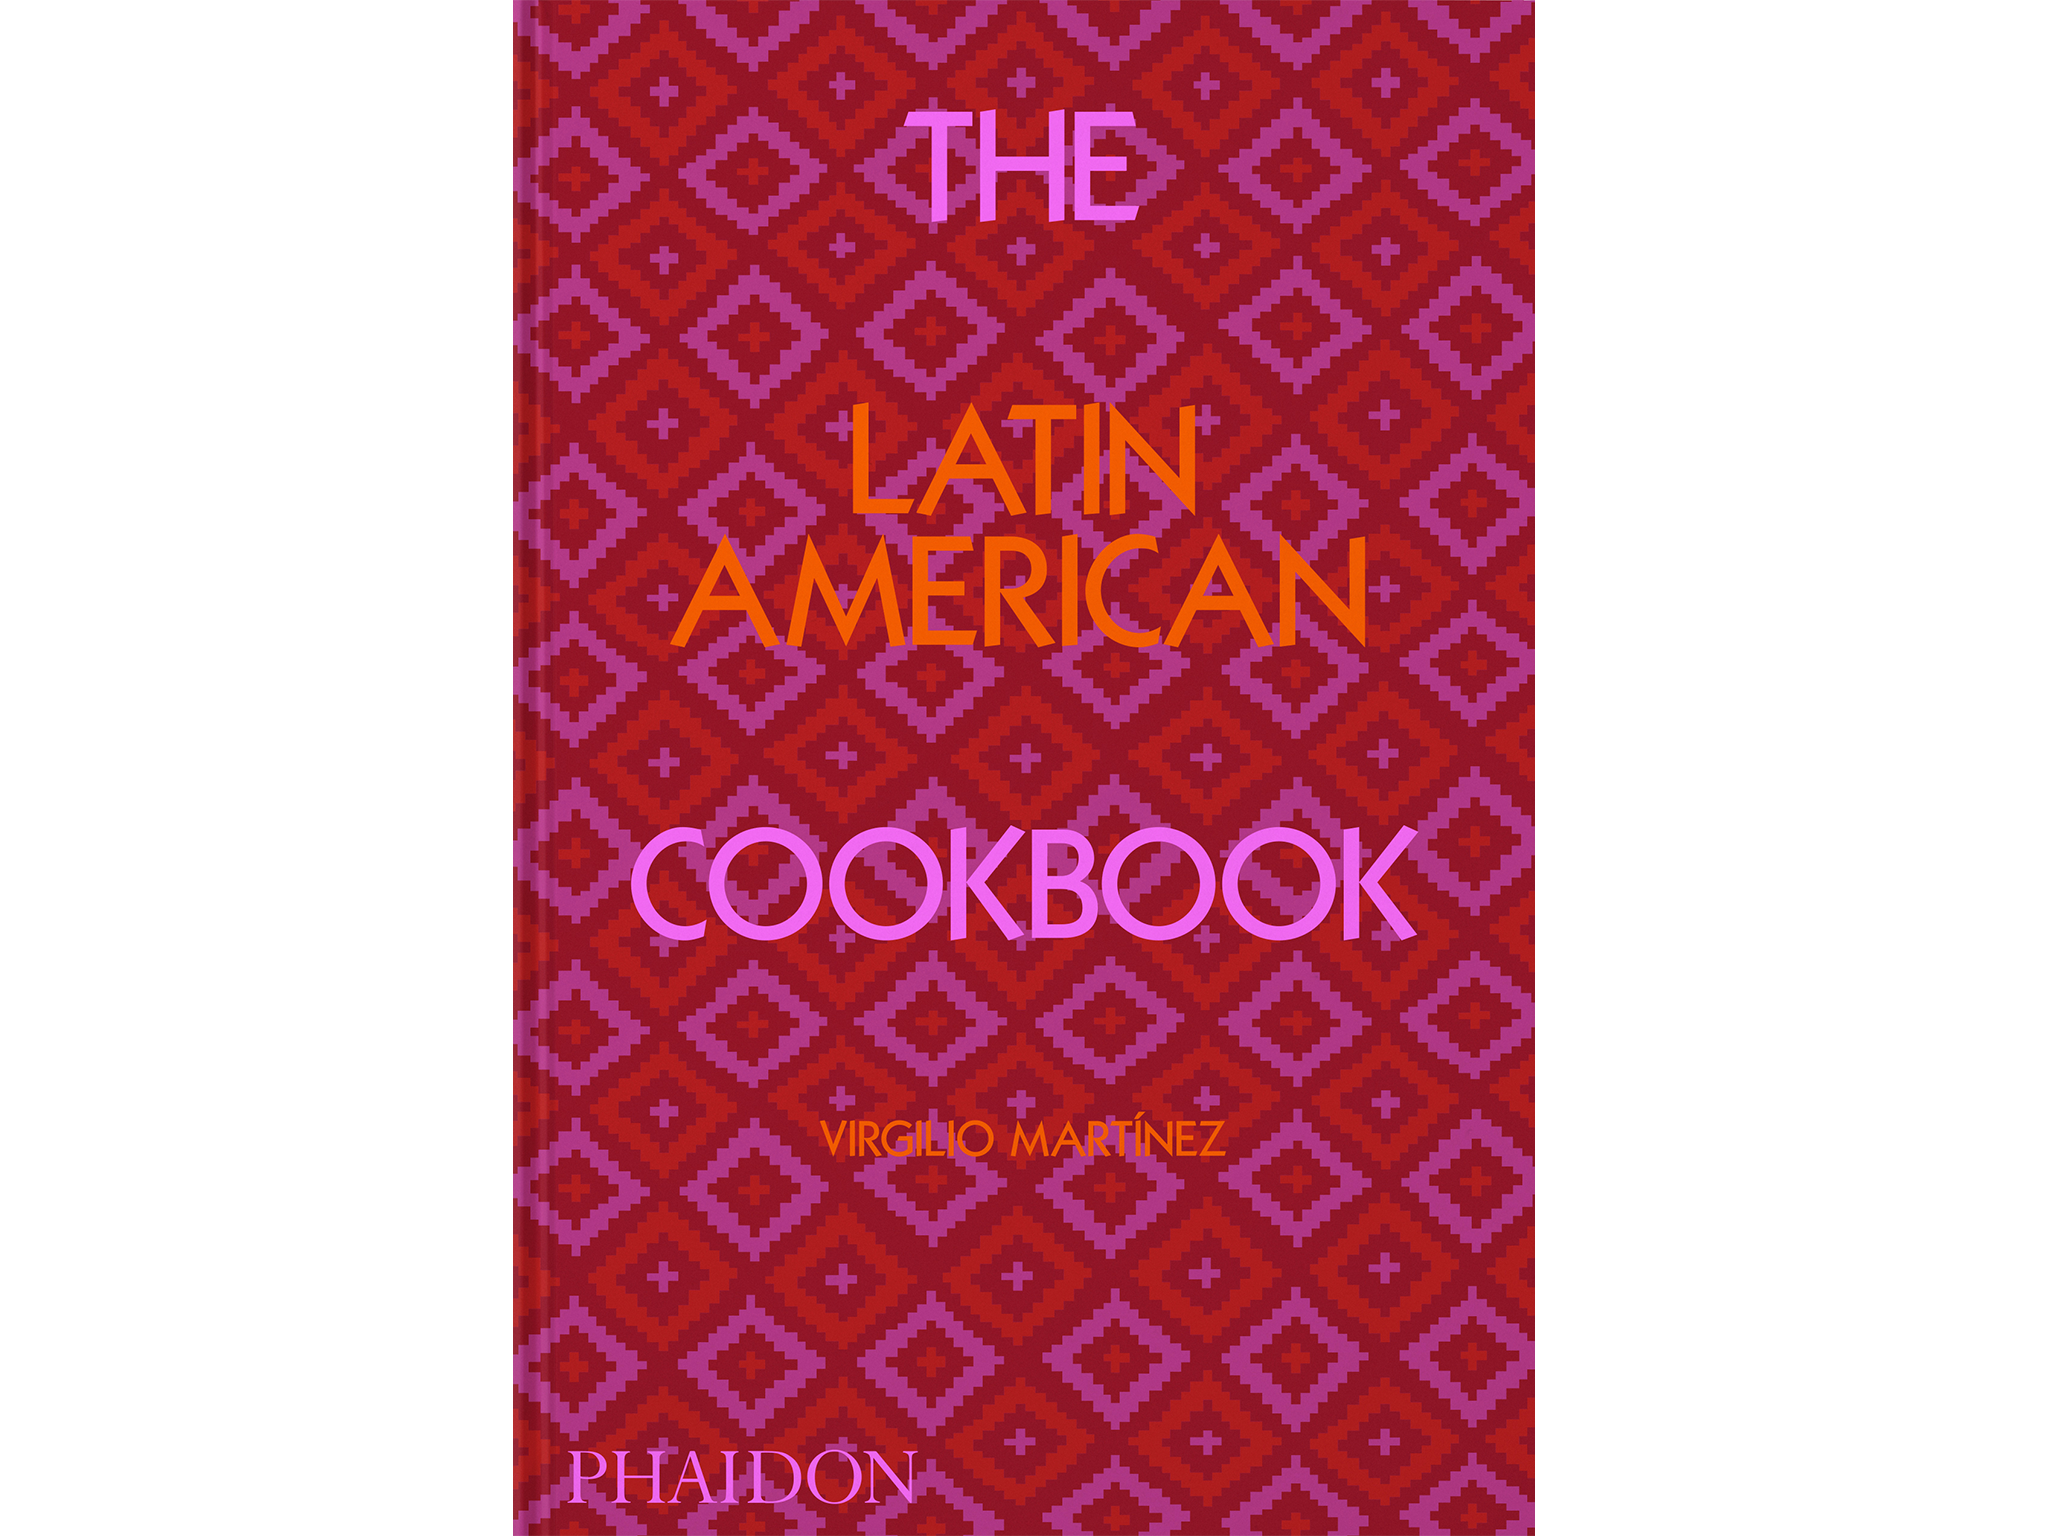 ‘THE LATIN AMERICAN COOKBOOK’ BY VIRGILIO MARTINEZ, PUBLISHED BY PHAIDON